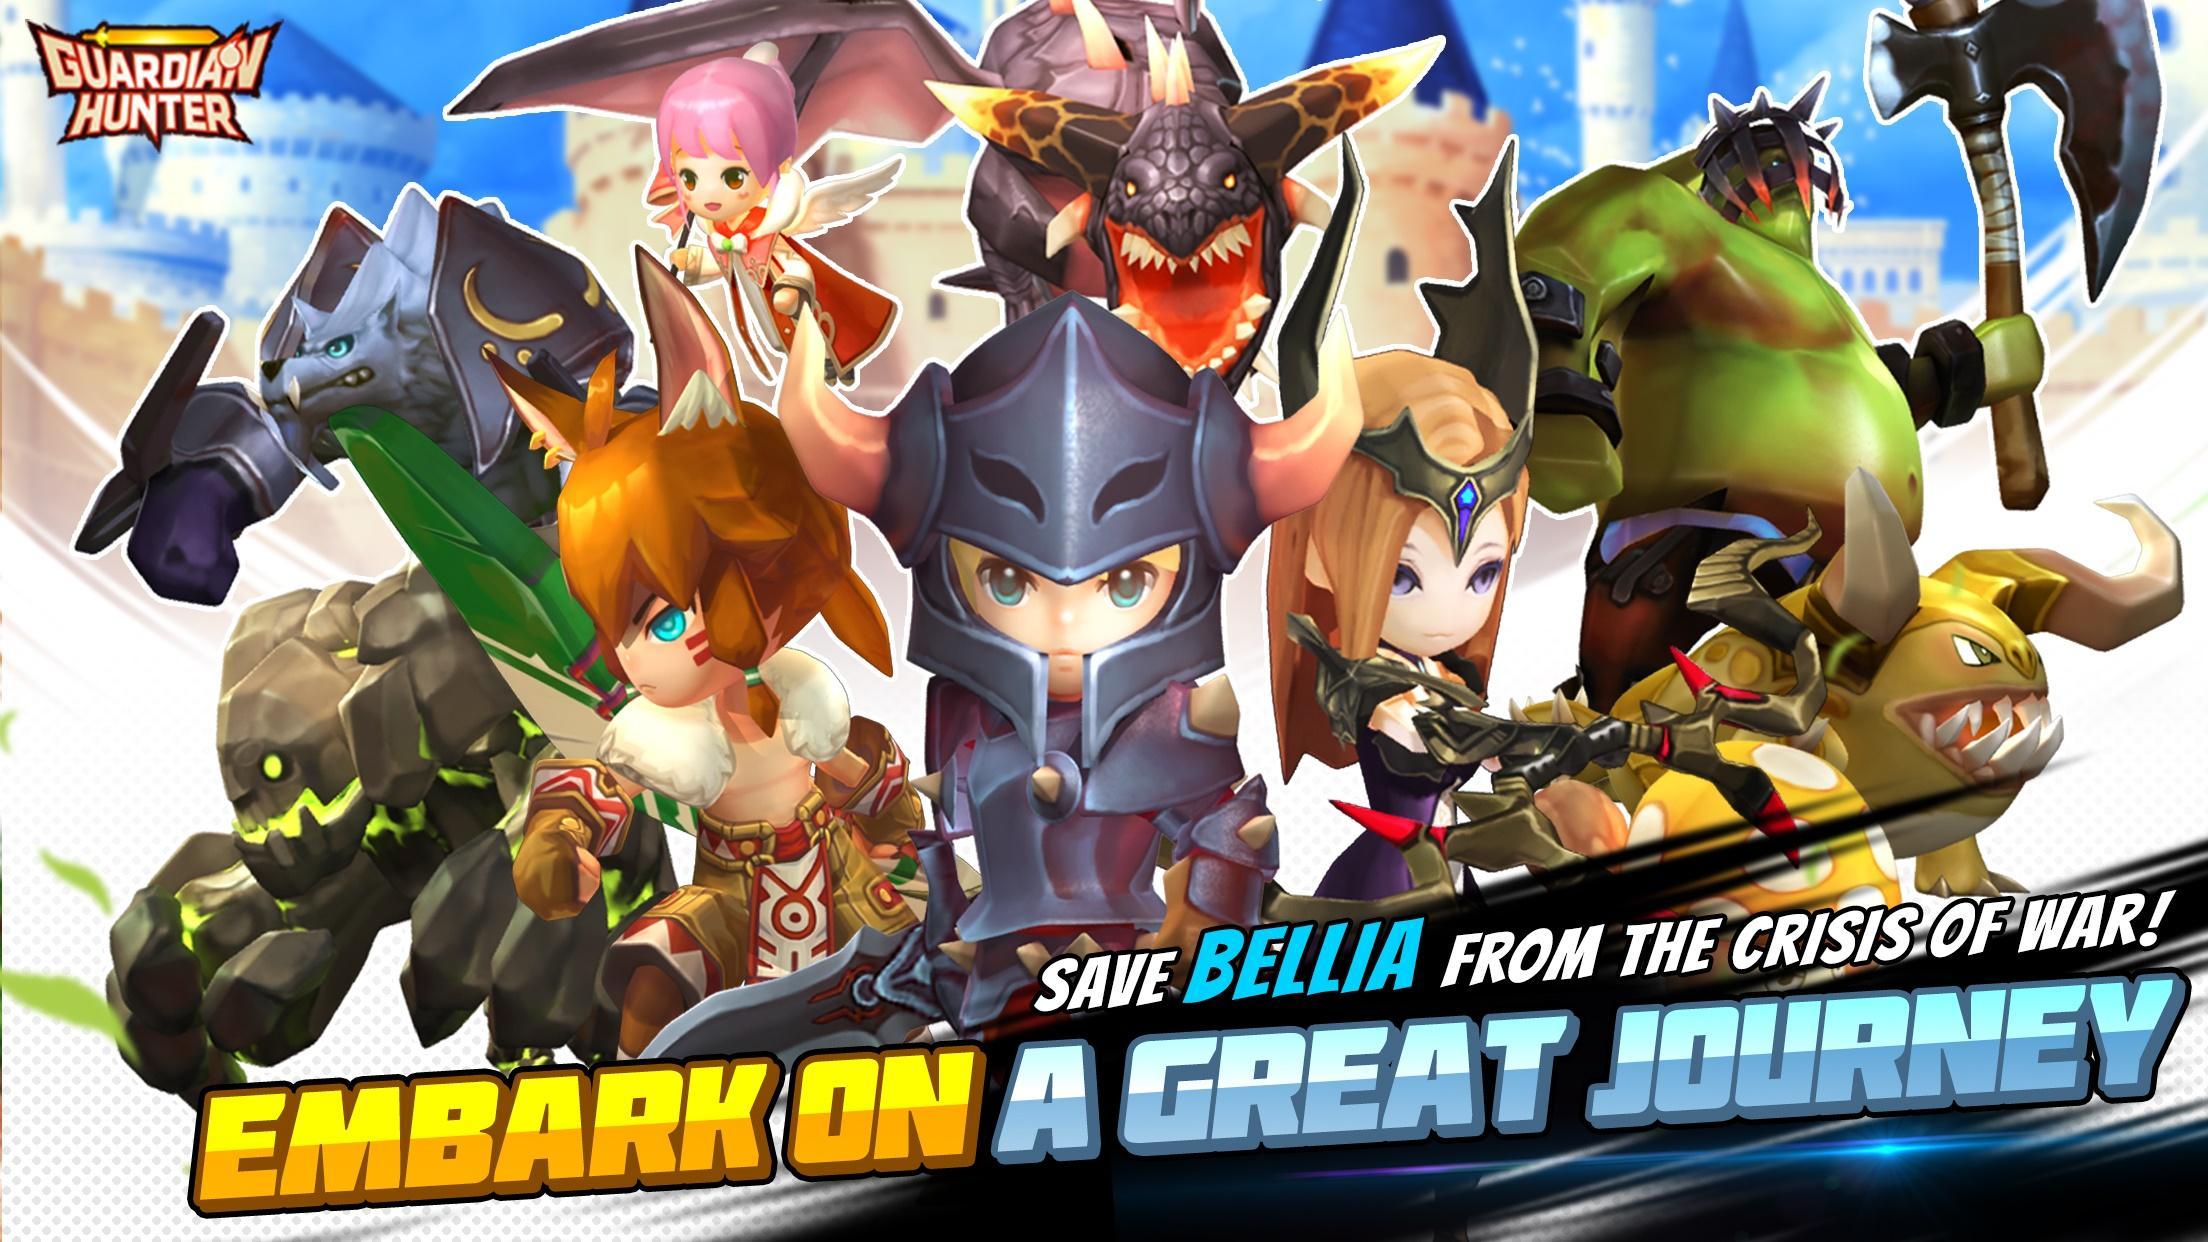 Download New Hack Version - Guardian Hunter: SuperBrawlRPG Hack Mod. This is an interesting action game against enemies. With this hack, you completely master the game with the DMG x20 hack function, DEF x20INF SP and many other features waiting for you to discover. Update all the latest hack daily for free at TaiHack.Net. Download Game MOD APK Guardian Hunter: SuperBrawlRPG Hack Mod Free New Update.